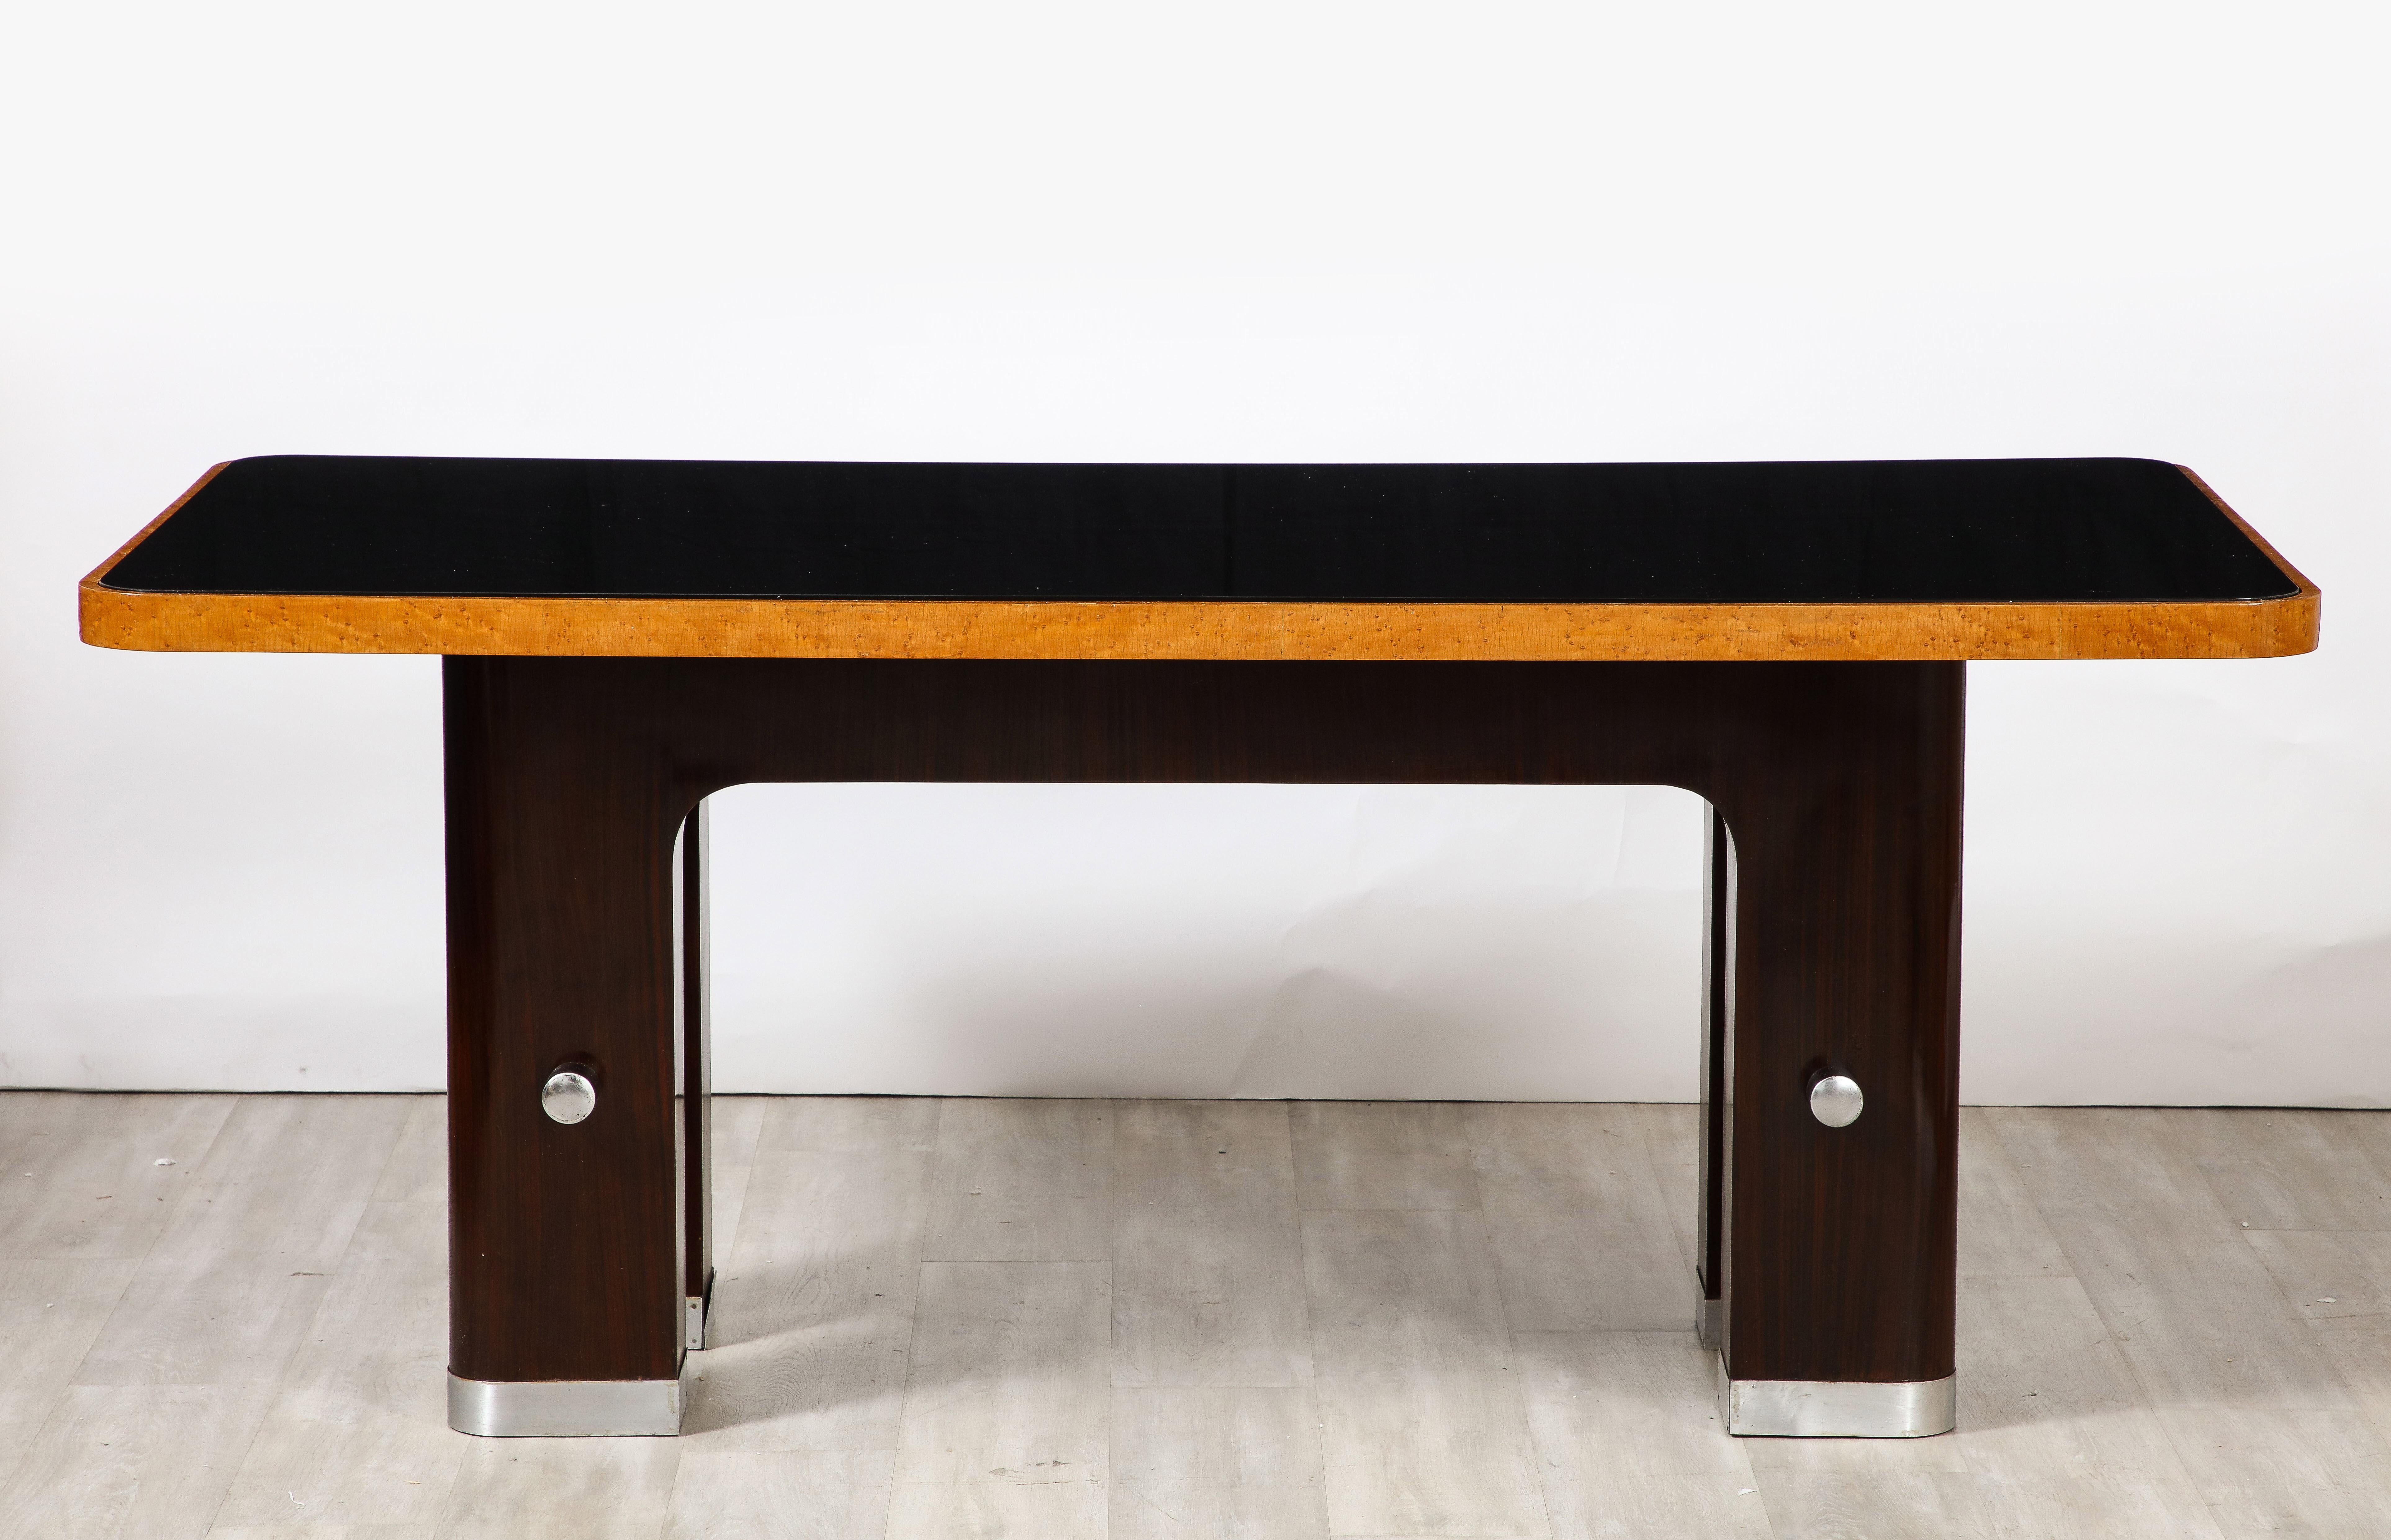 An Italian Art Deco dining table, the black glass surface is inset to the molded apron of Birdseye maple; resting on two rounded Macassar ebony columns on each end connected with a rounded chrome stretcher, the chrome echoed at the base of each